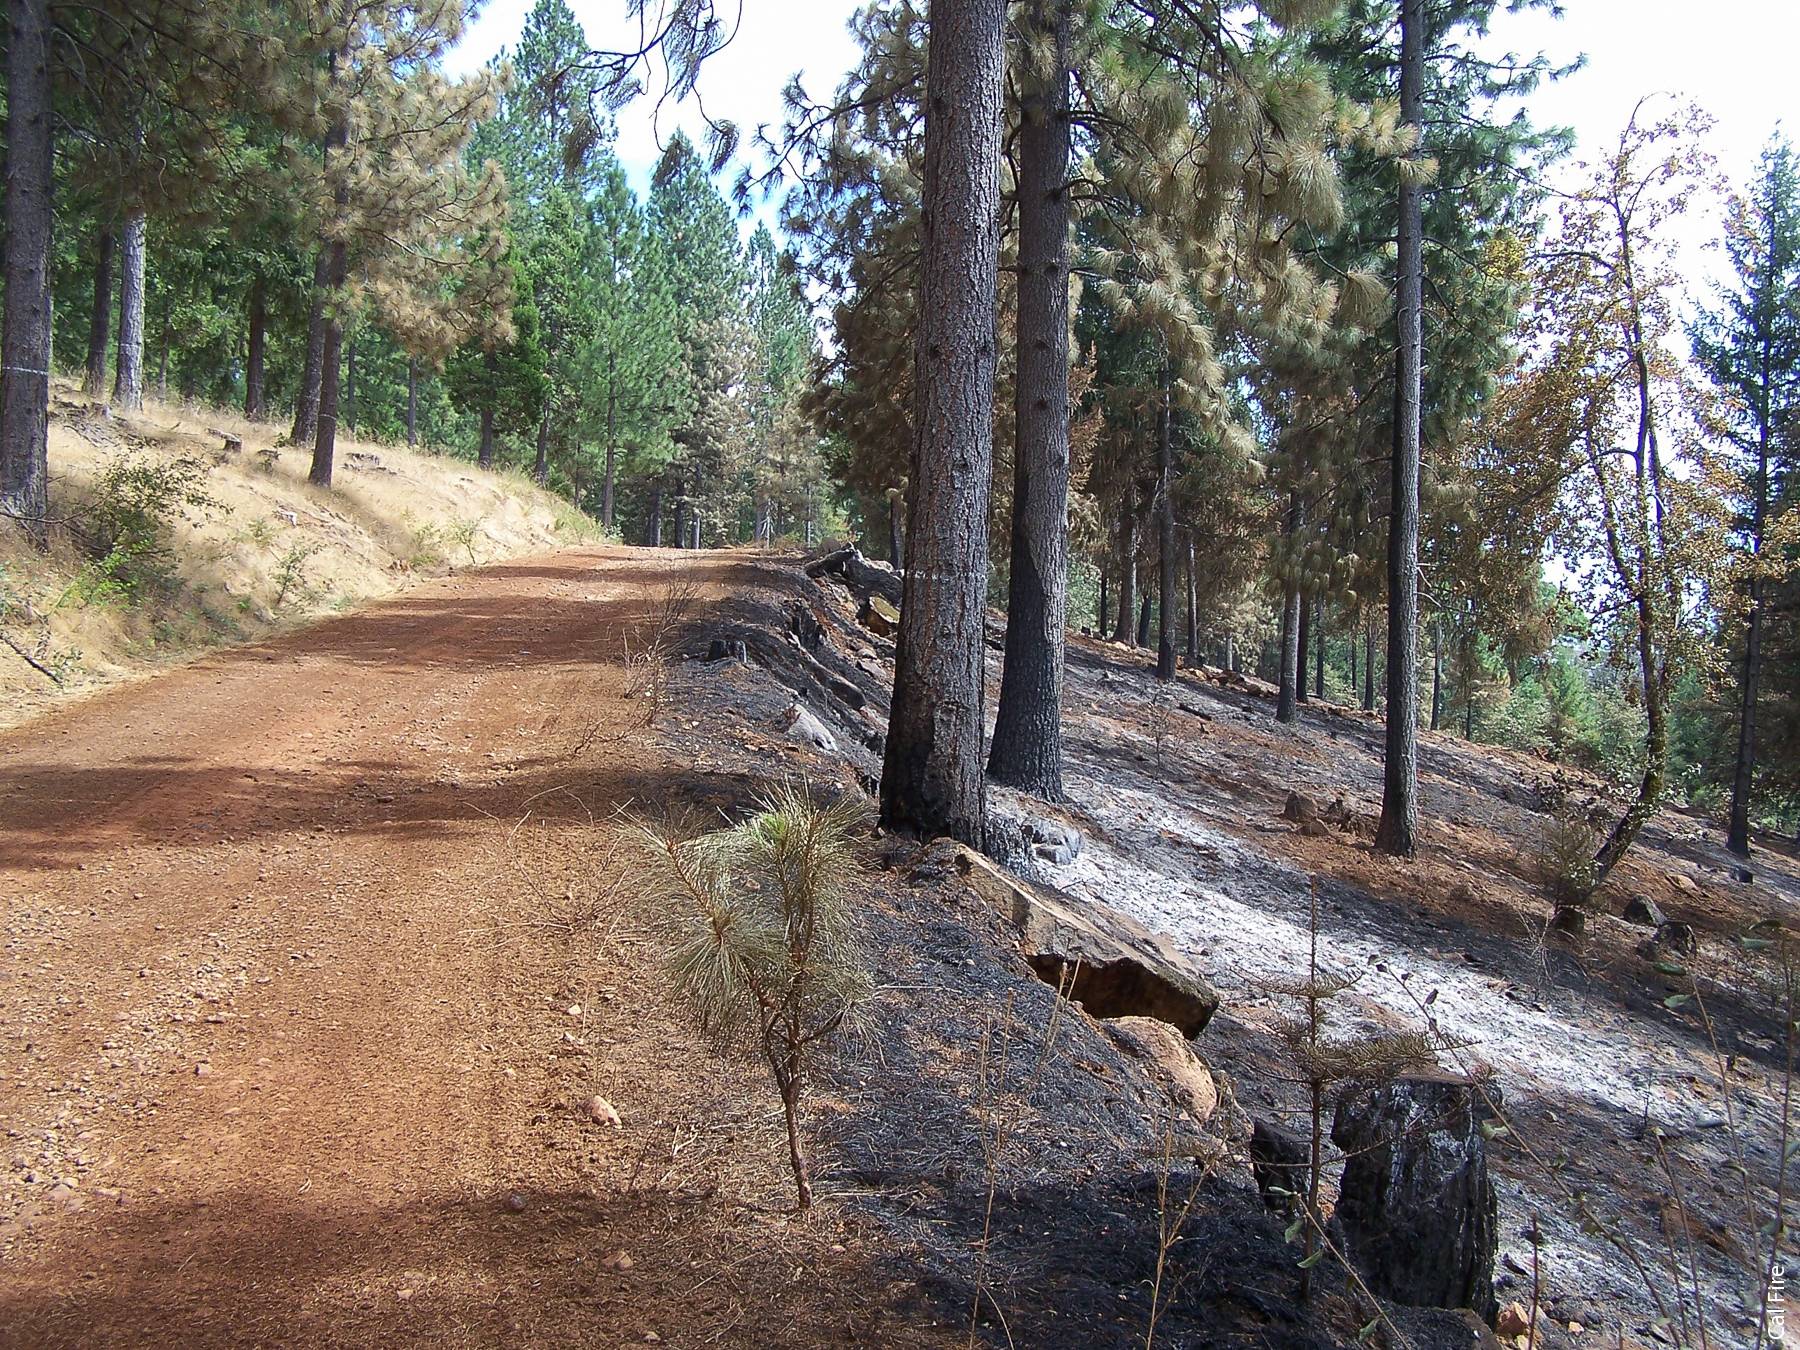 In 2006, a fire in Marysville (Yuba County) was stopped at the Oregon Ridge fuel break, which was constructed by private timber landowners as part of the Slapjack fuel reduction project.